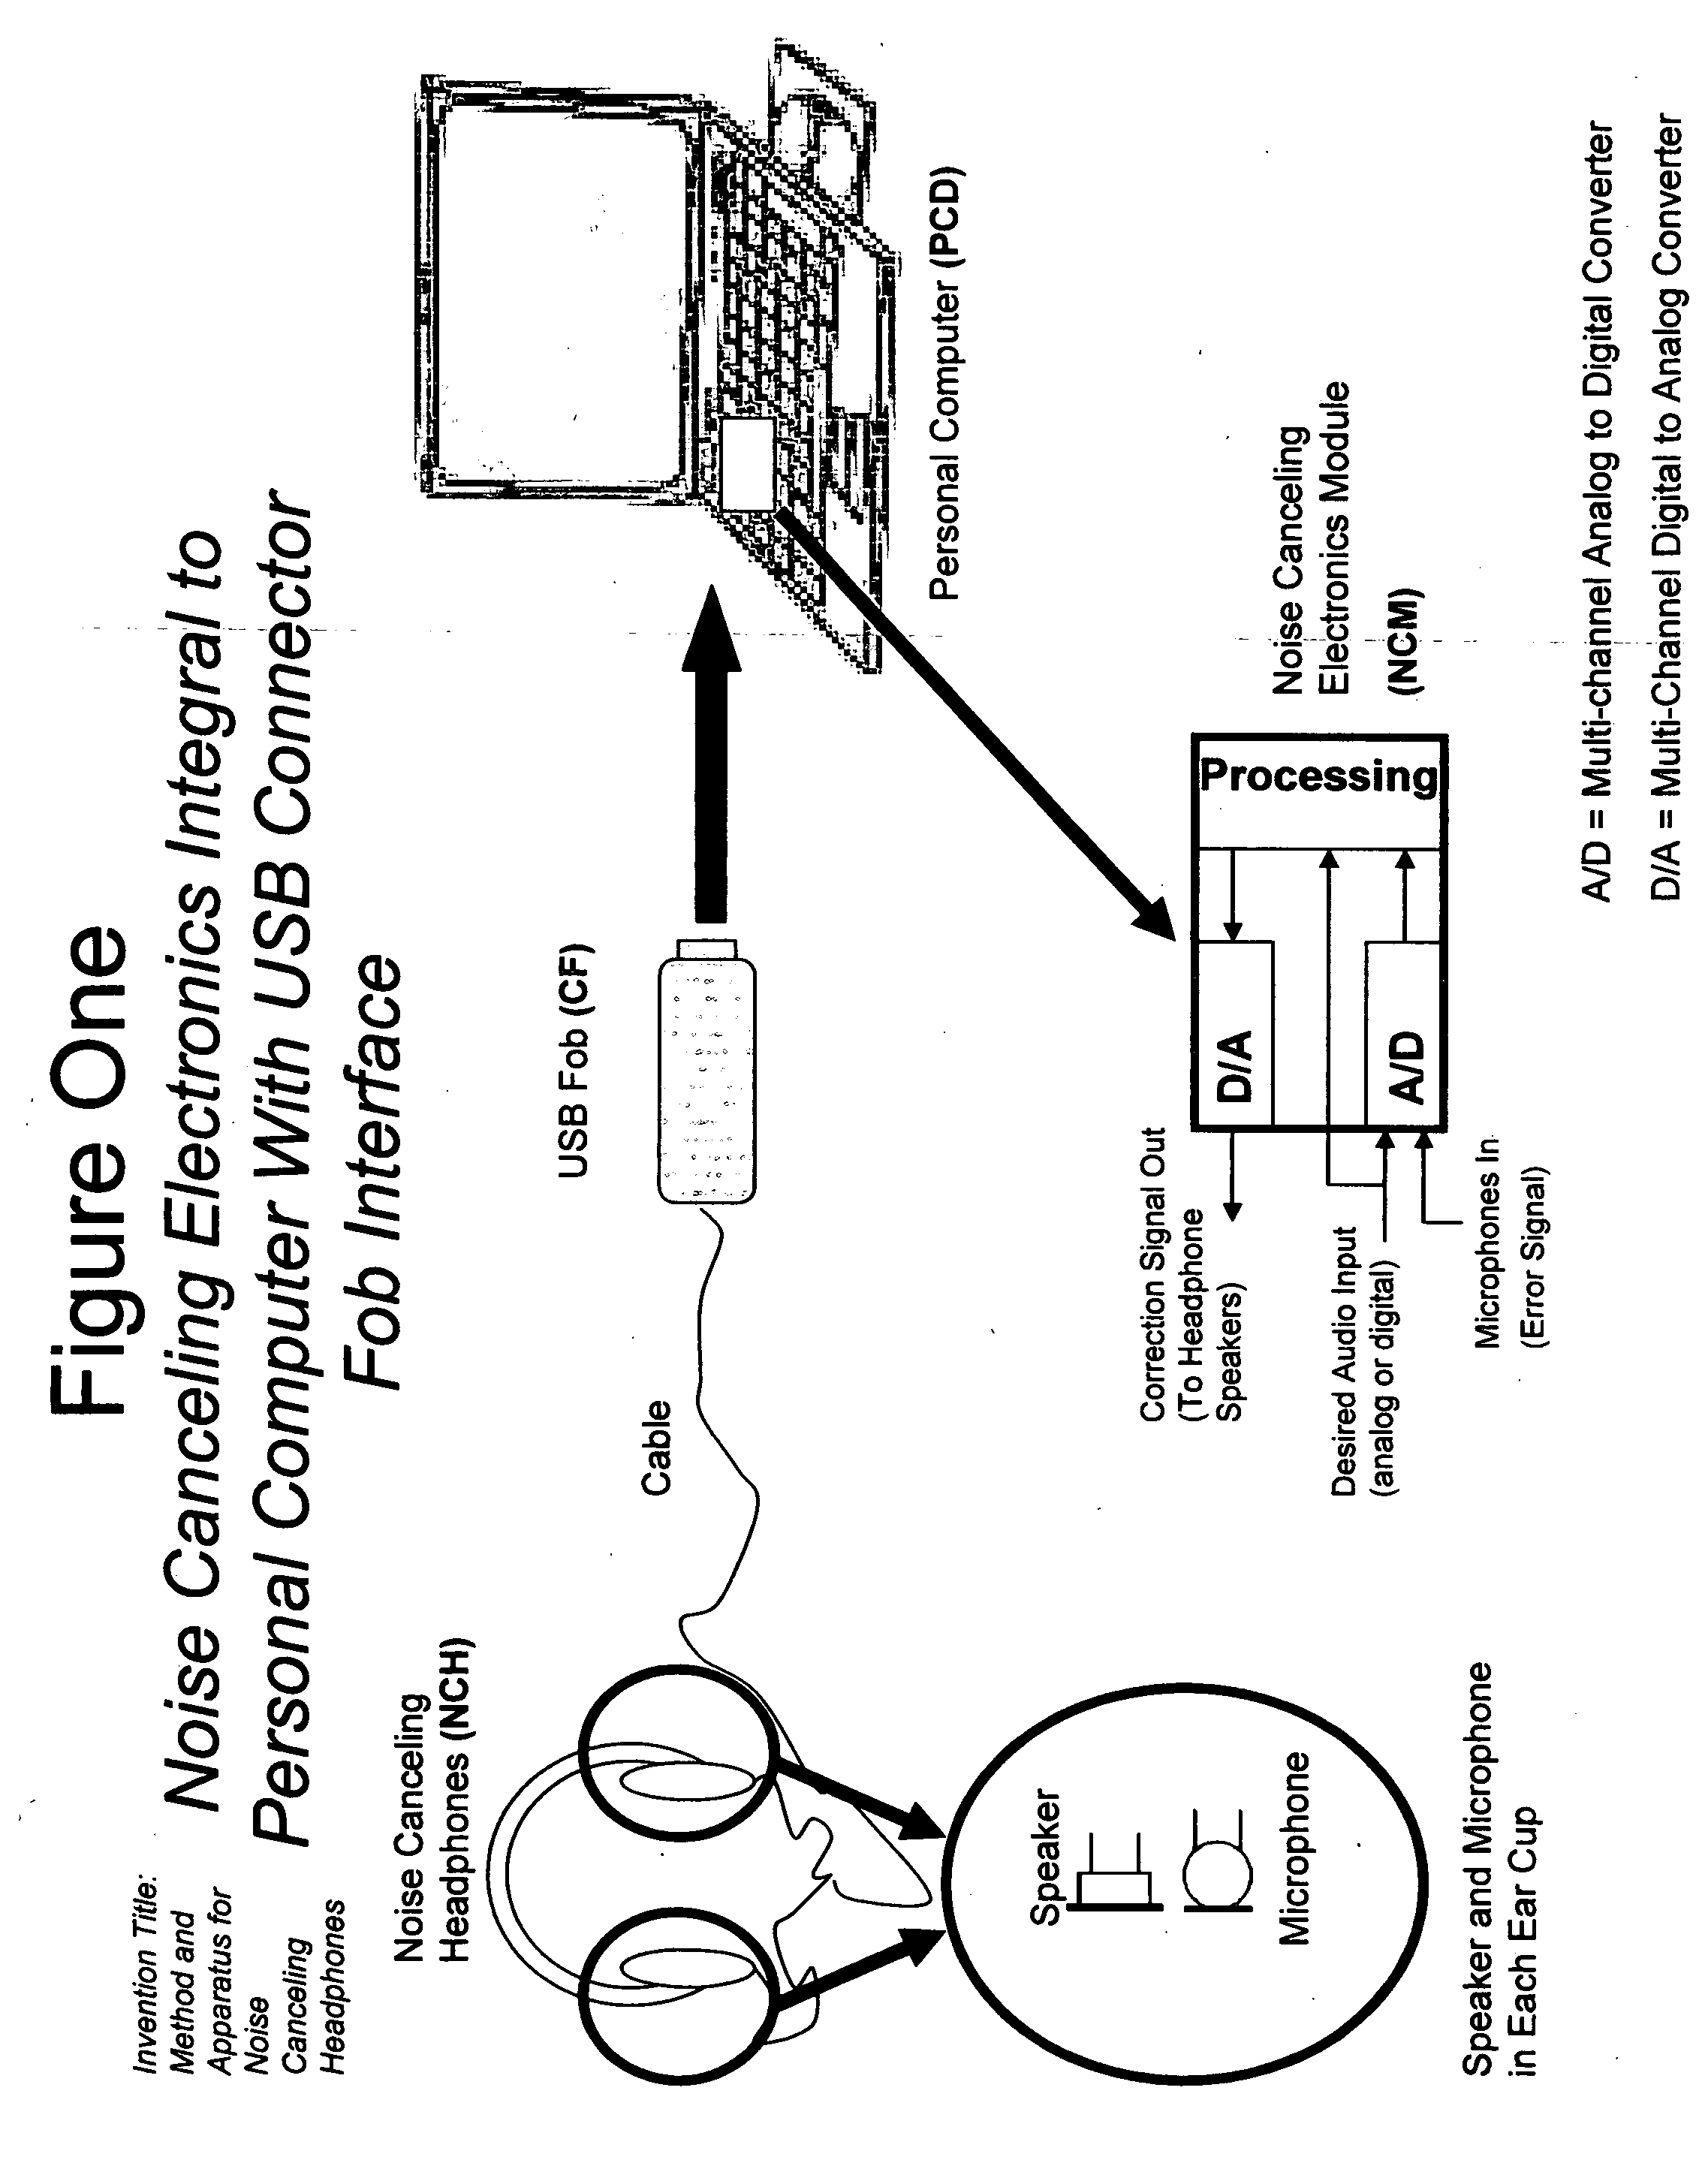 Method and apparatus for noise canceling headphones